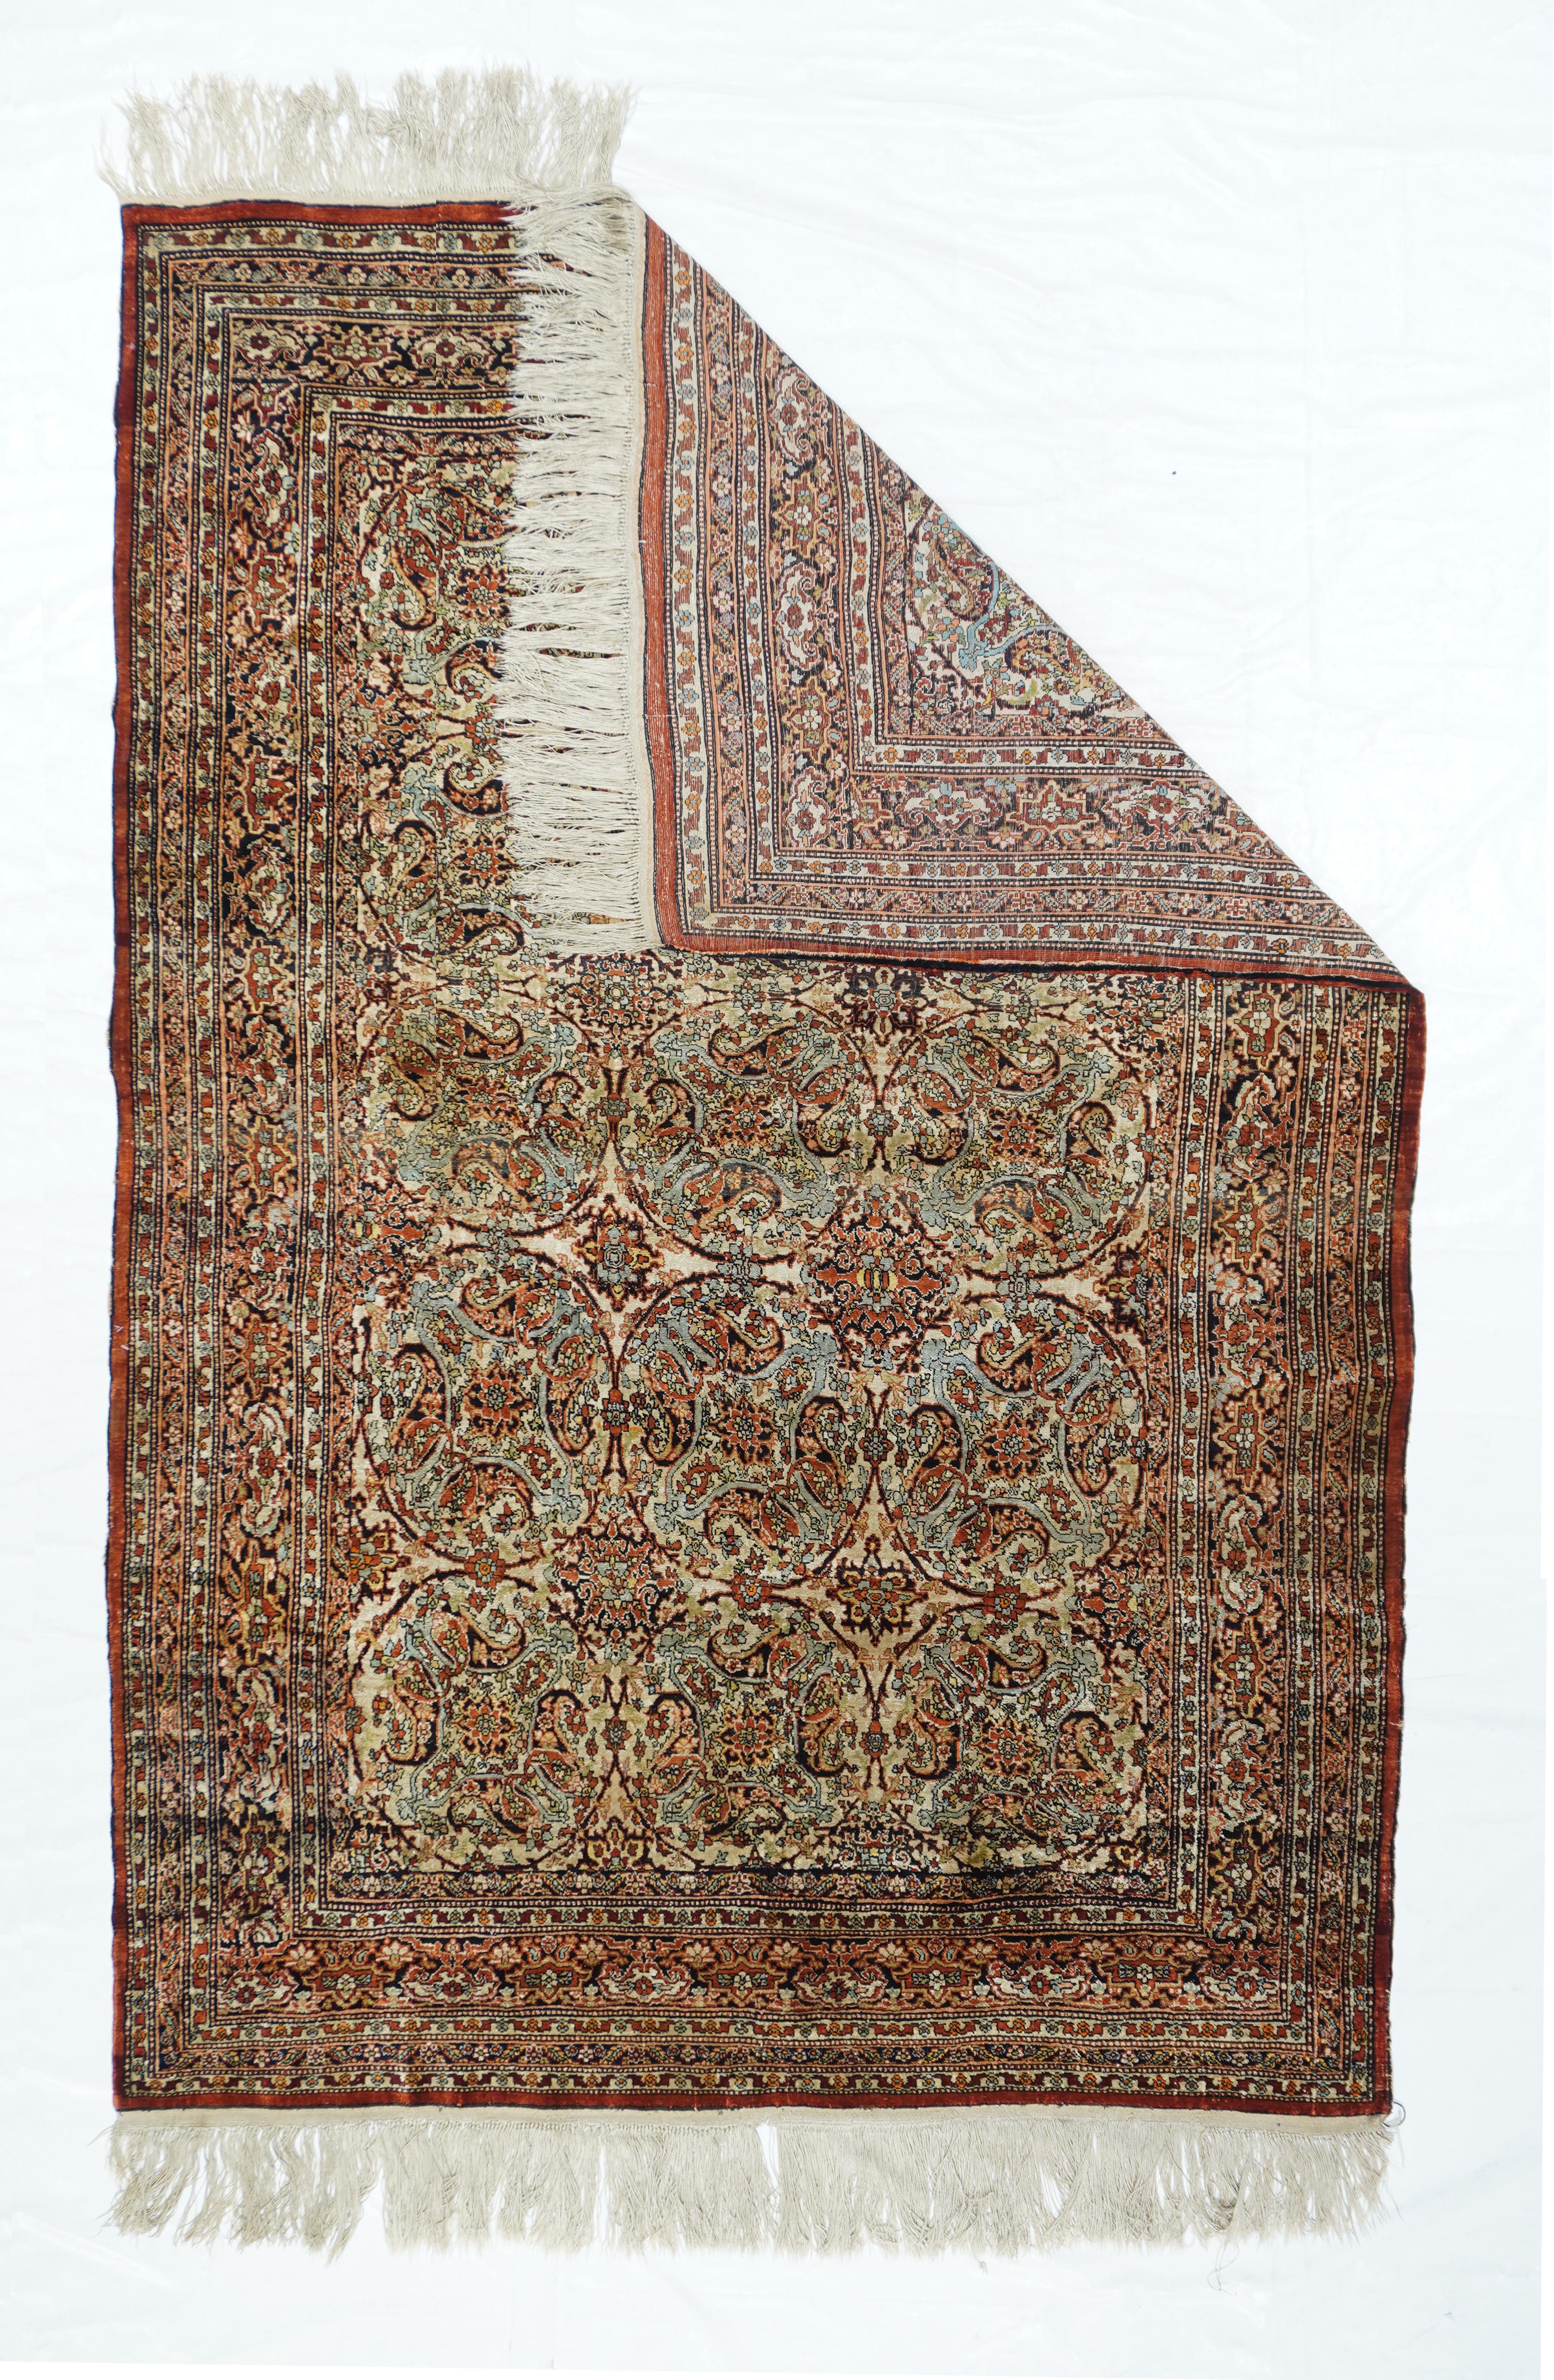 Antique Tabriz rug, measures : 4'9'' x 7'. This antique city Tabriz scatter from the desirable 